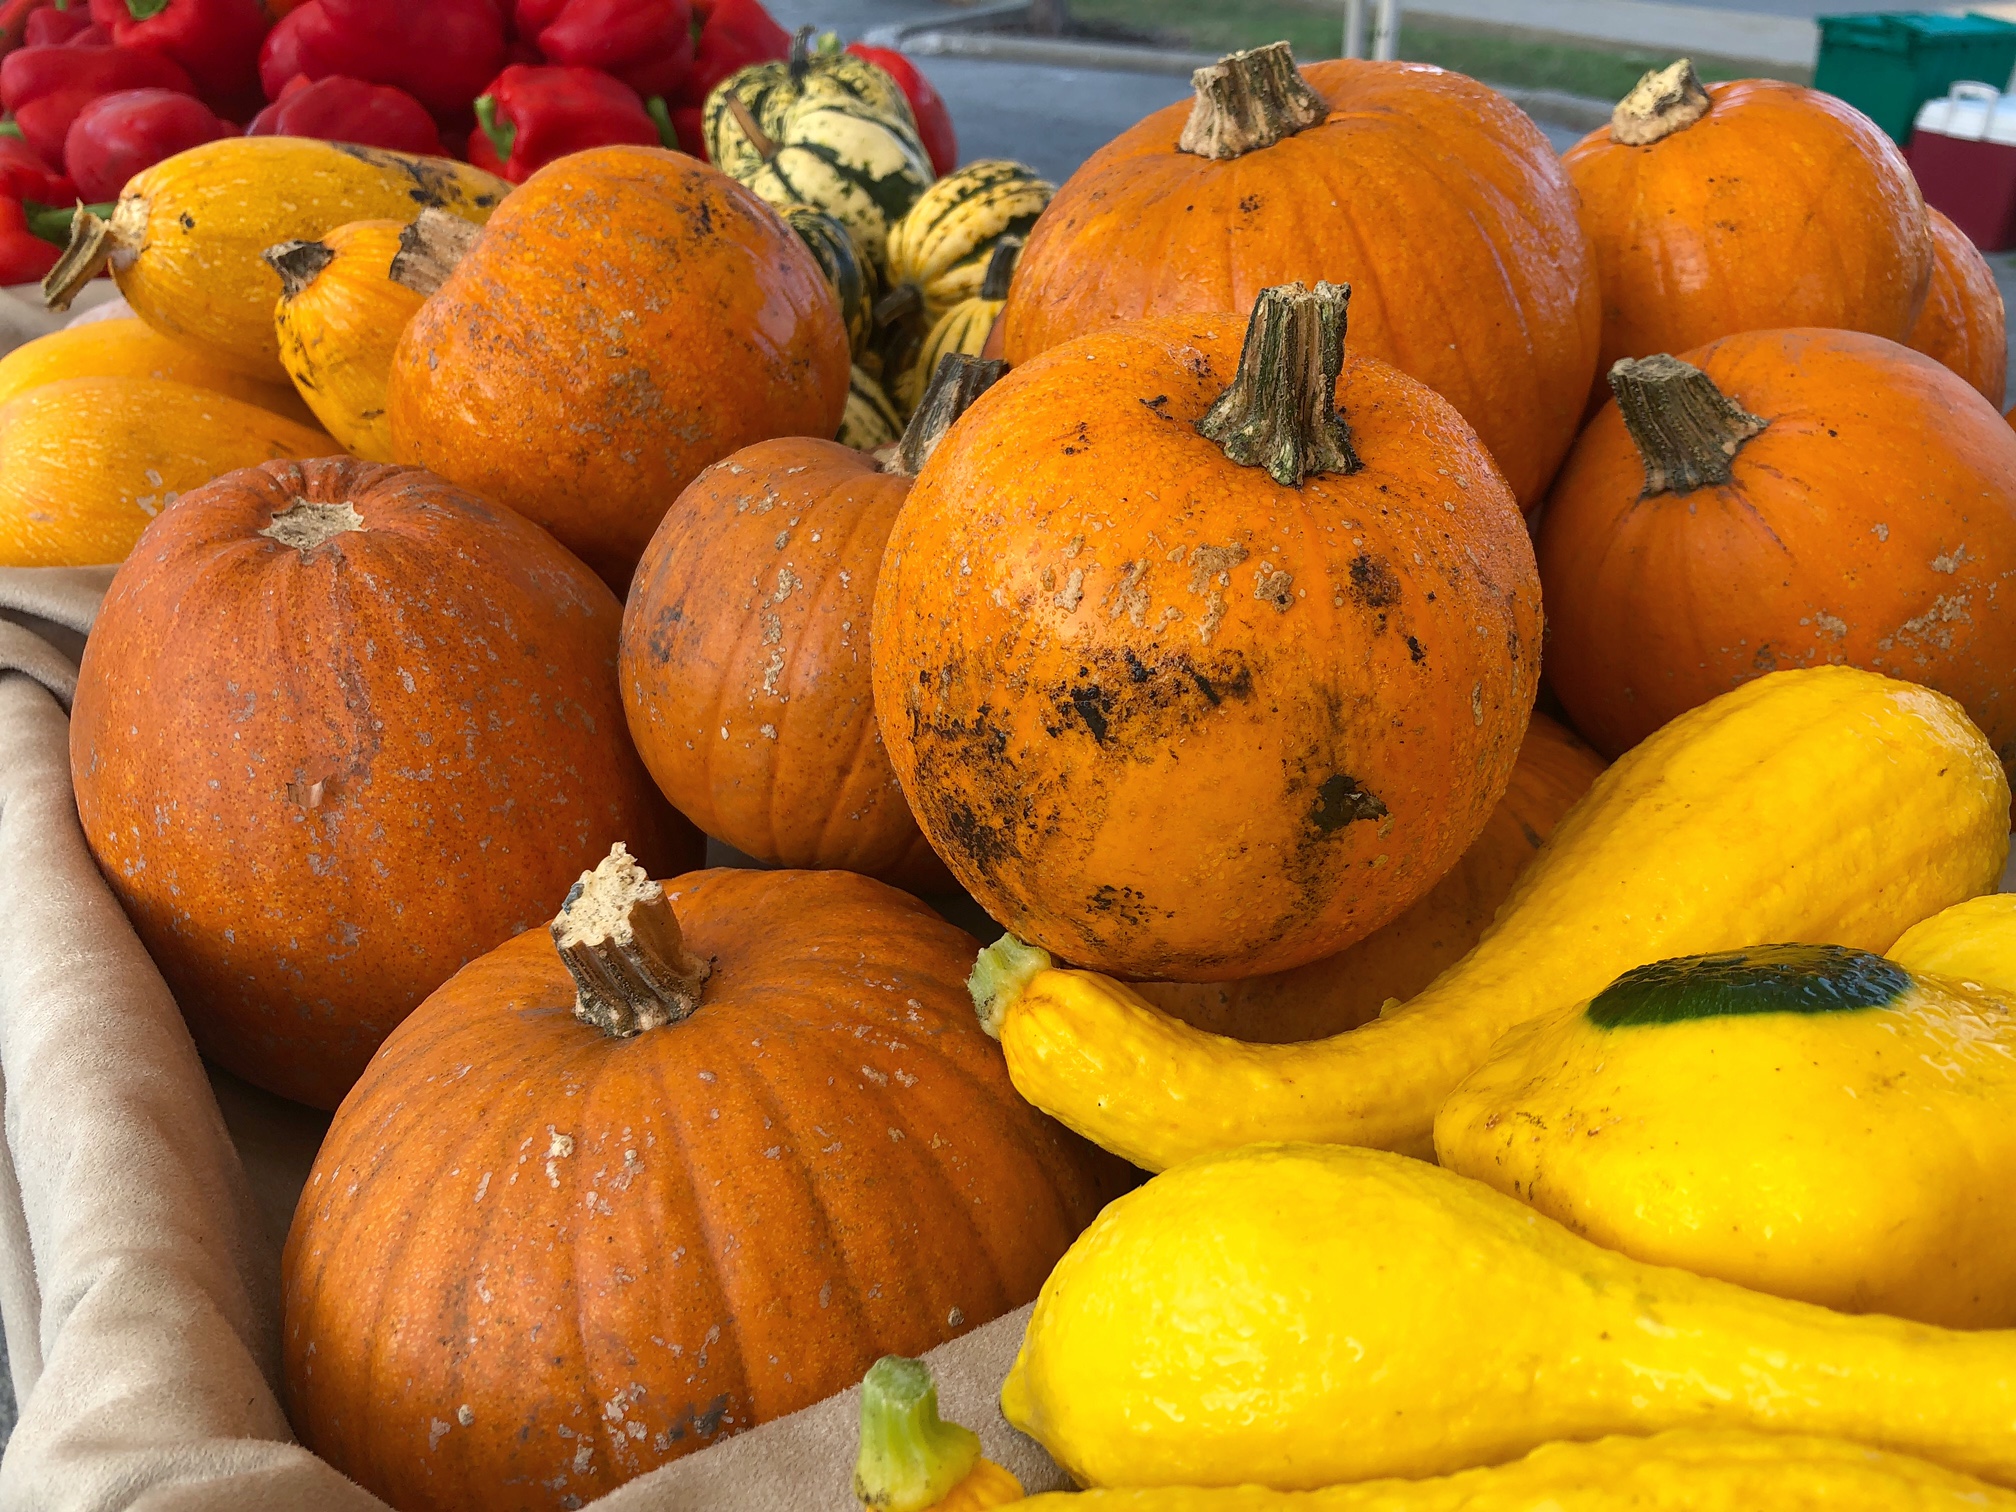 Pumpkins with a bit of dirt on them are waiting to be bought at the market beside yellow squash. Photo by Alyssa Buckley.